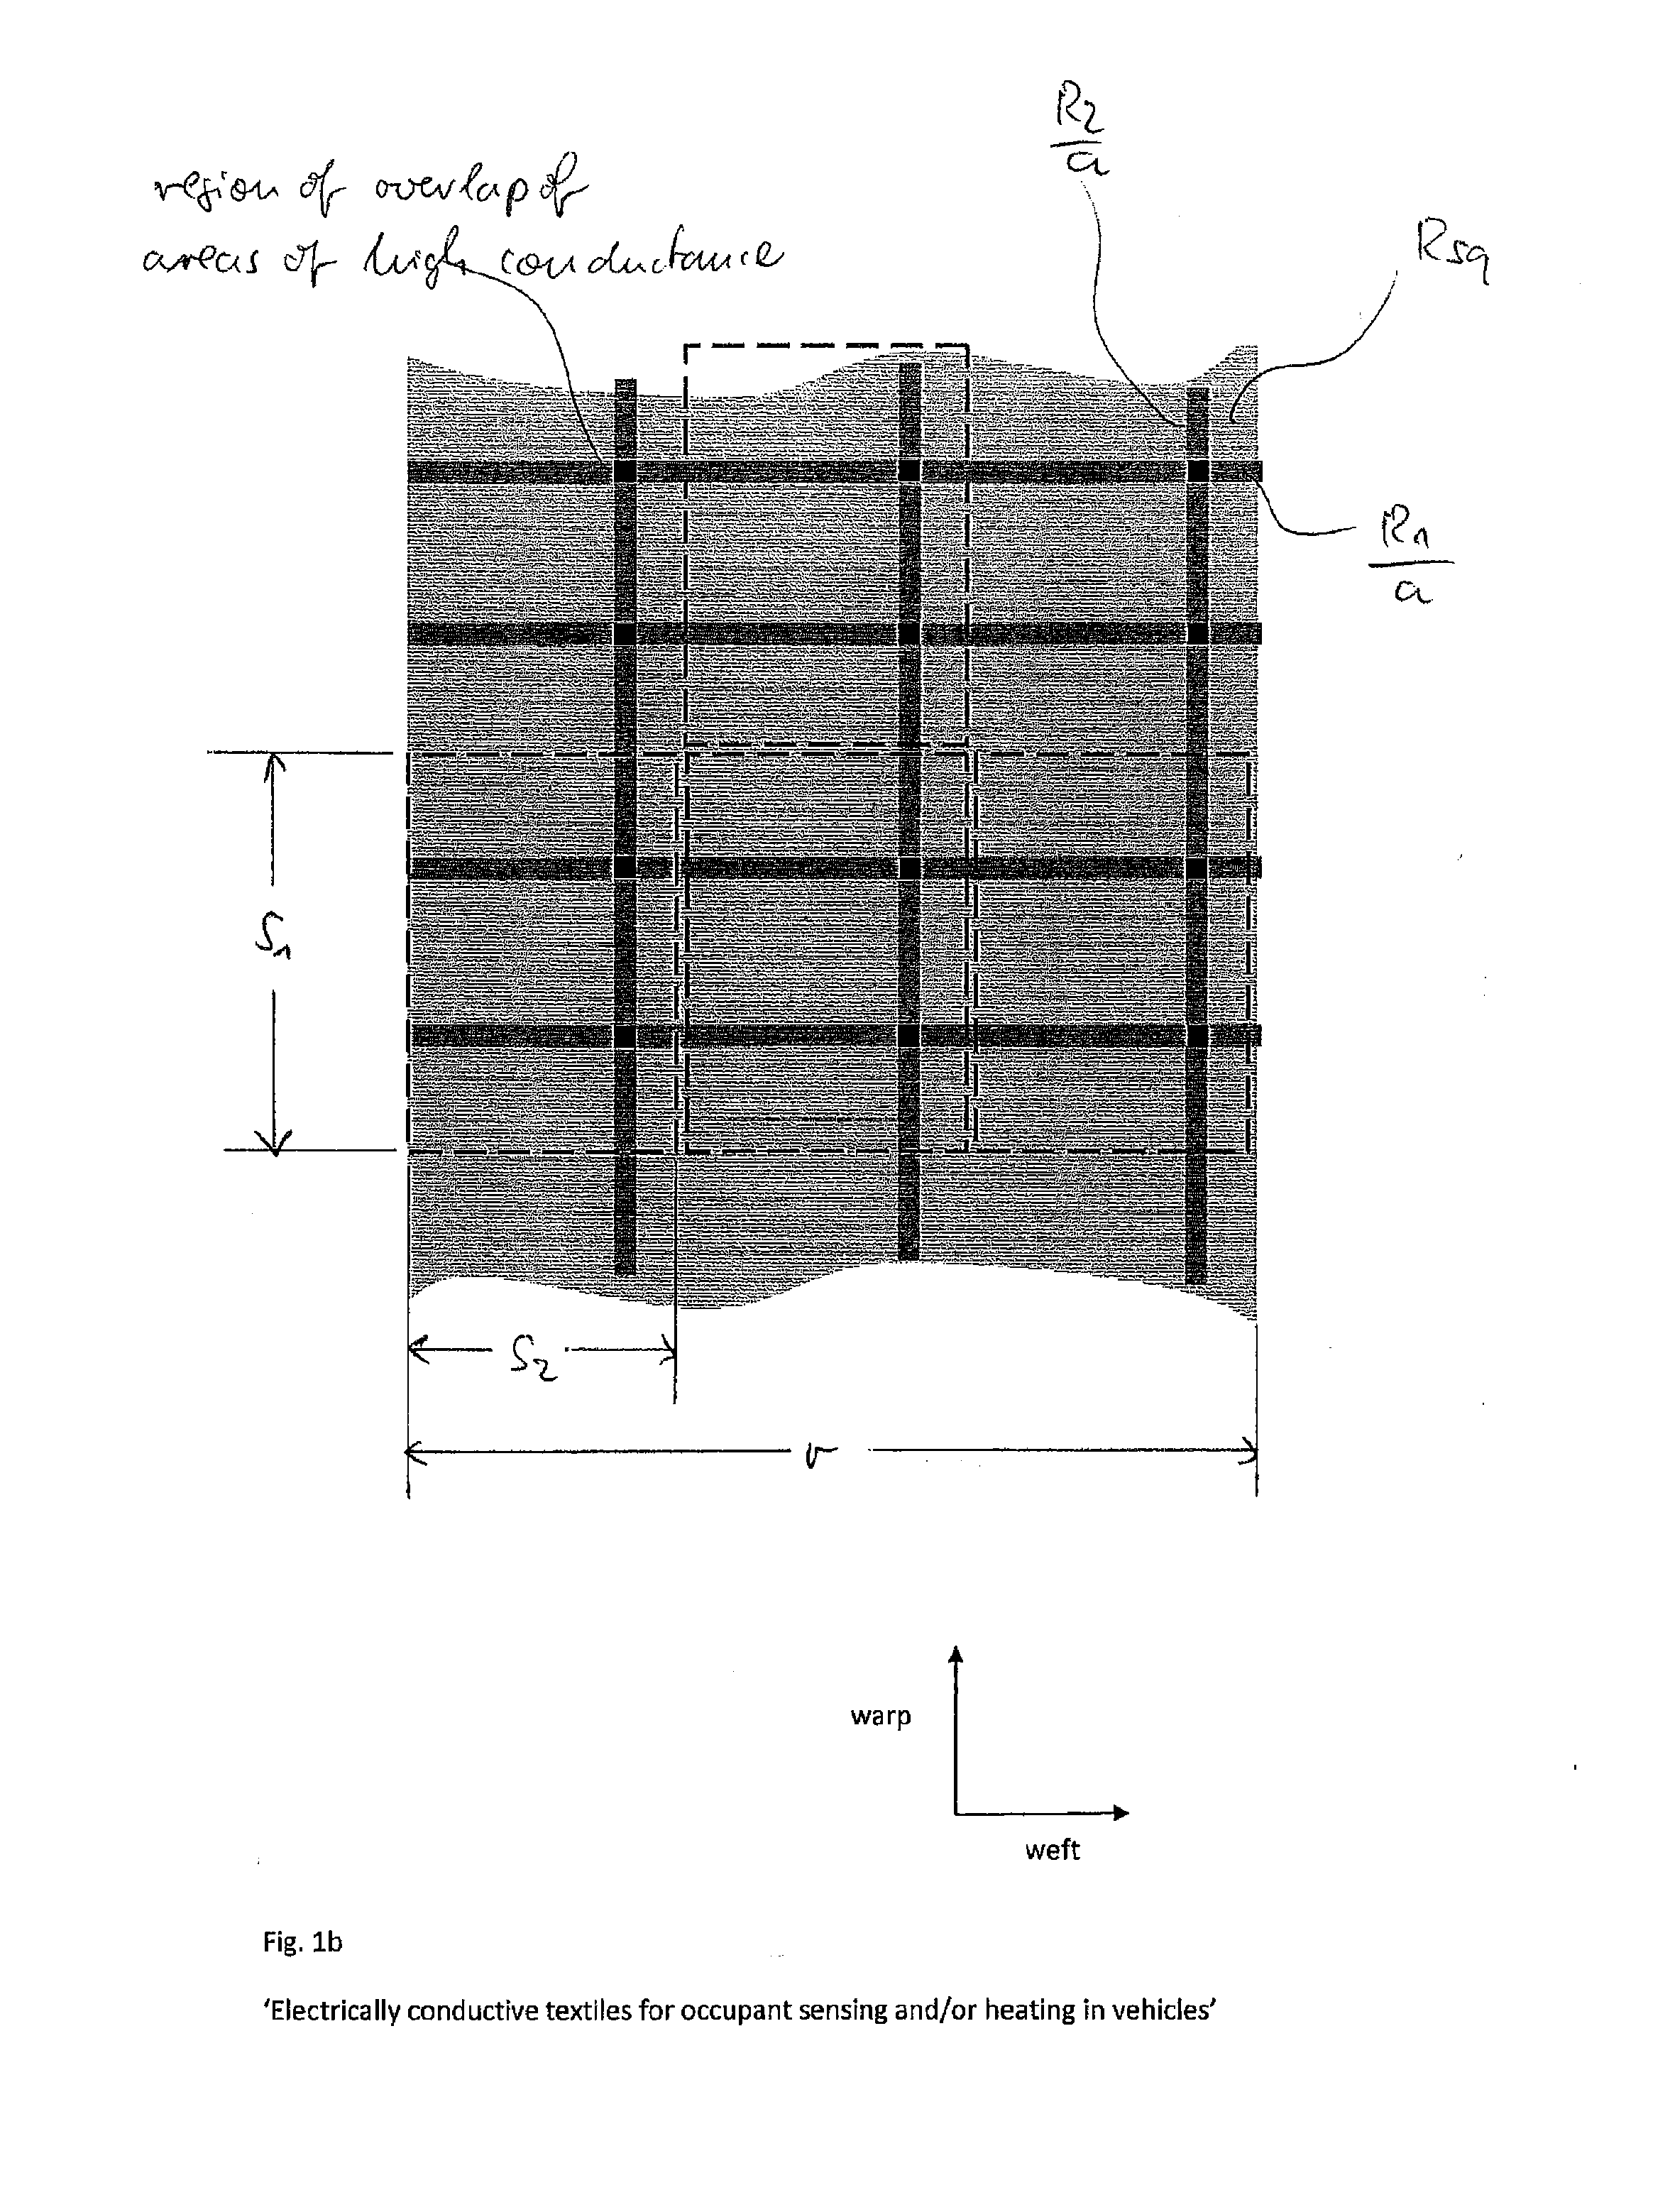 Electrically conductive textiles for occupant sensing and/or heating applications